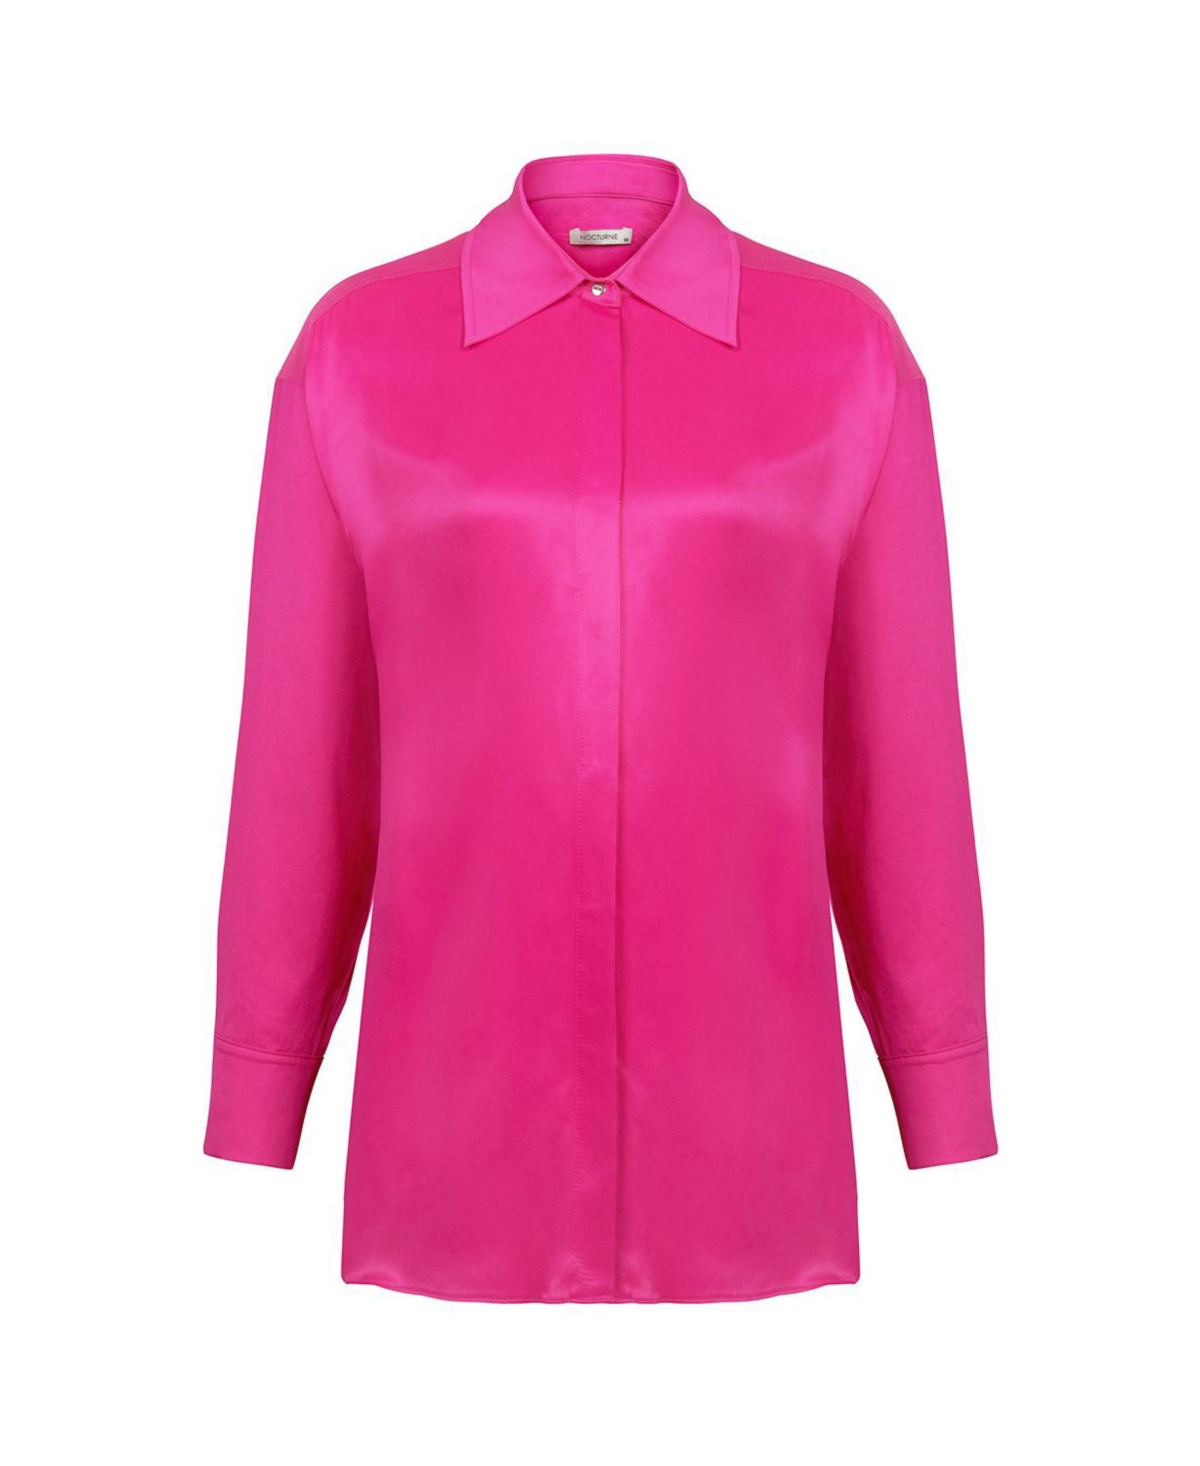 NOCTURNE WOMEN'S BELTED SHIRT